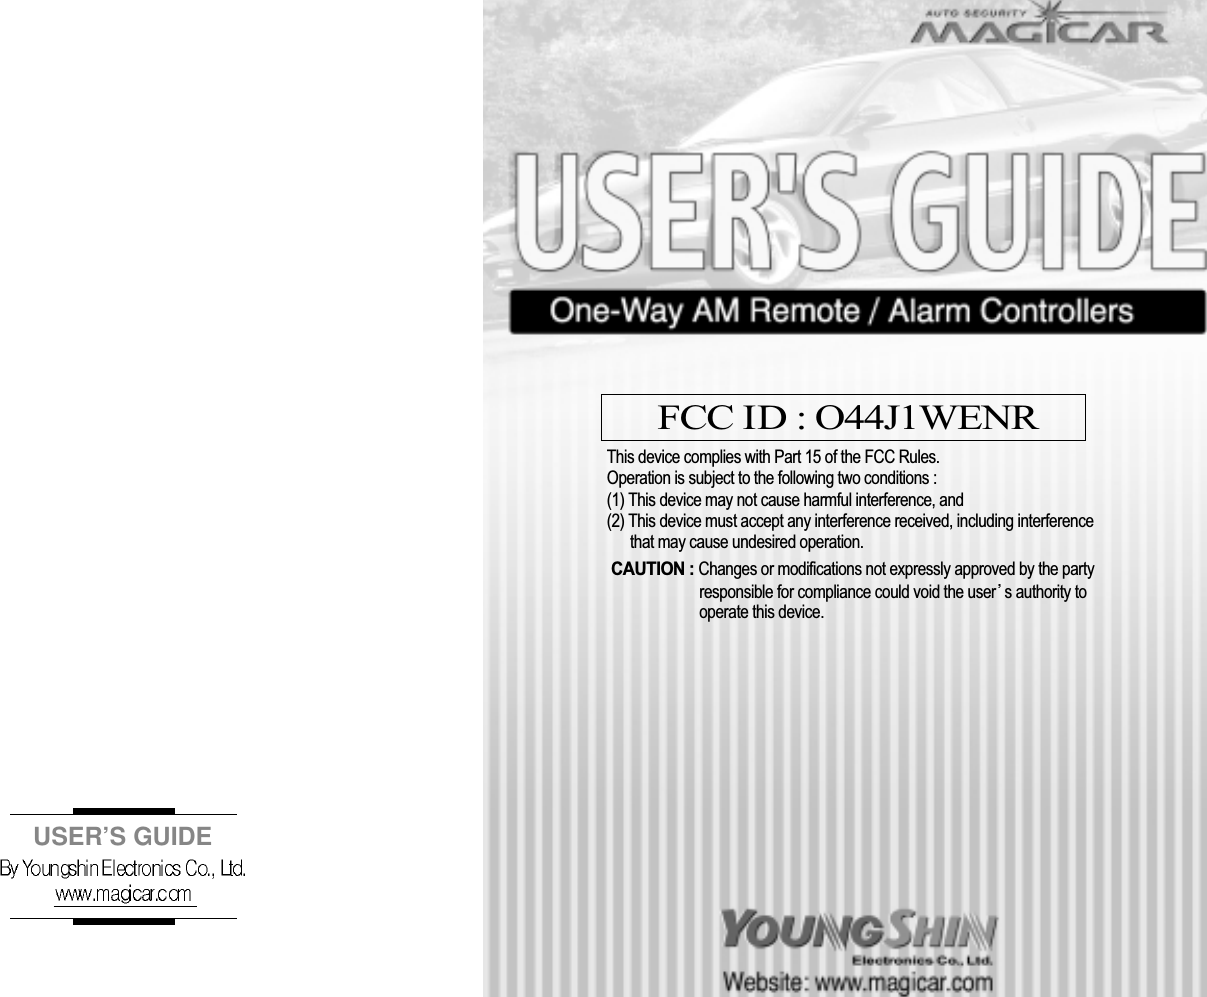 USER’S GUIDEFCC ID : O44J1WENRThis device complies with Part 15 of the FCC Rules. Operation is subject to the following two conditions : (1) This device may not cause harmful interference, and(2) This device must accept any interference received, including interference that may cause undesired operation. CAUTION : Changes or modifications not expressly approved by the party responsible for compliance could void the user s authority to operate this device. 